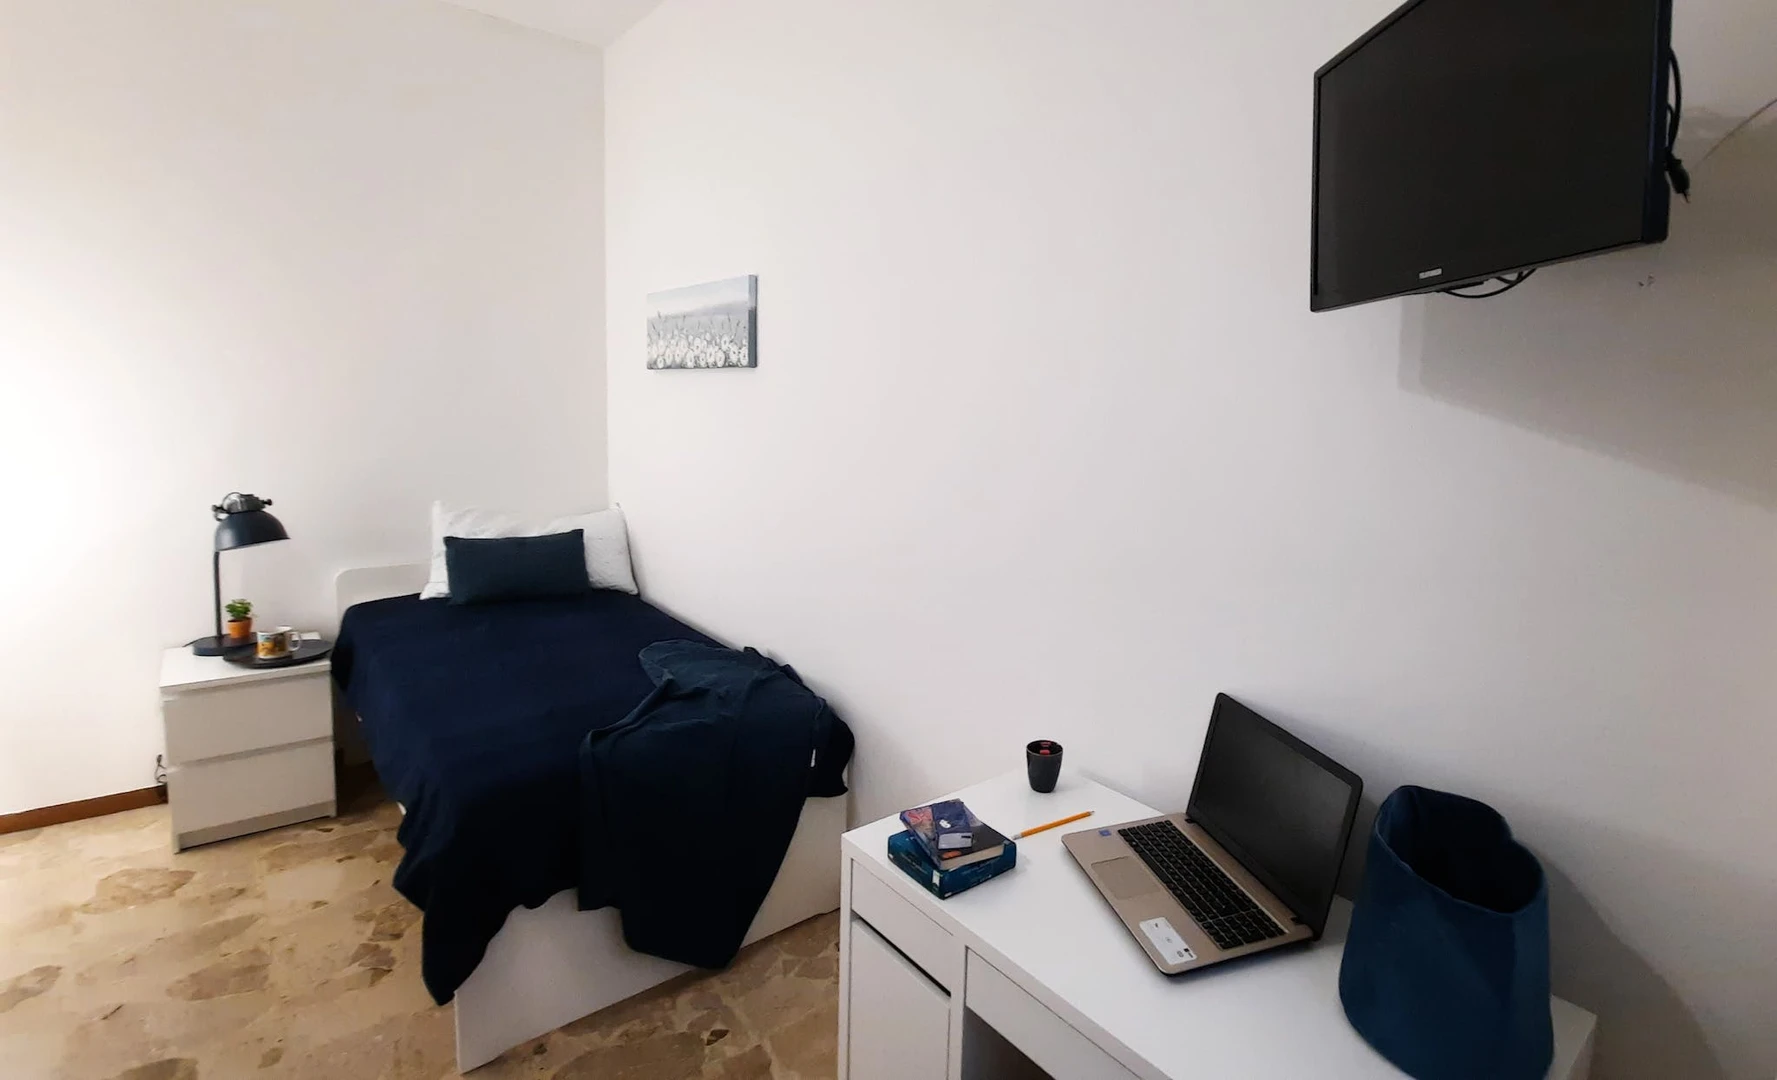 Renting rooms by the month in Bergamo